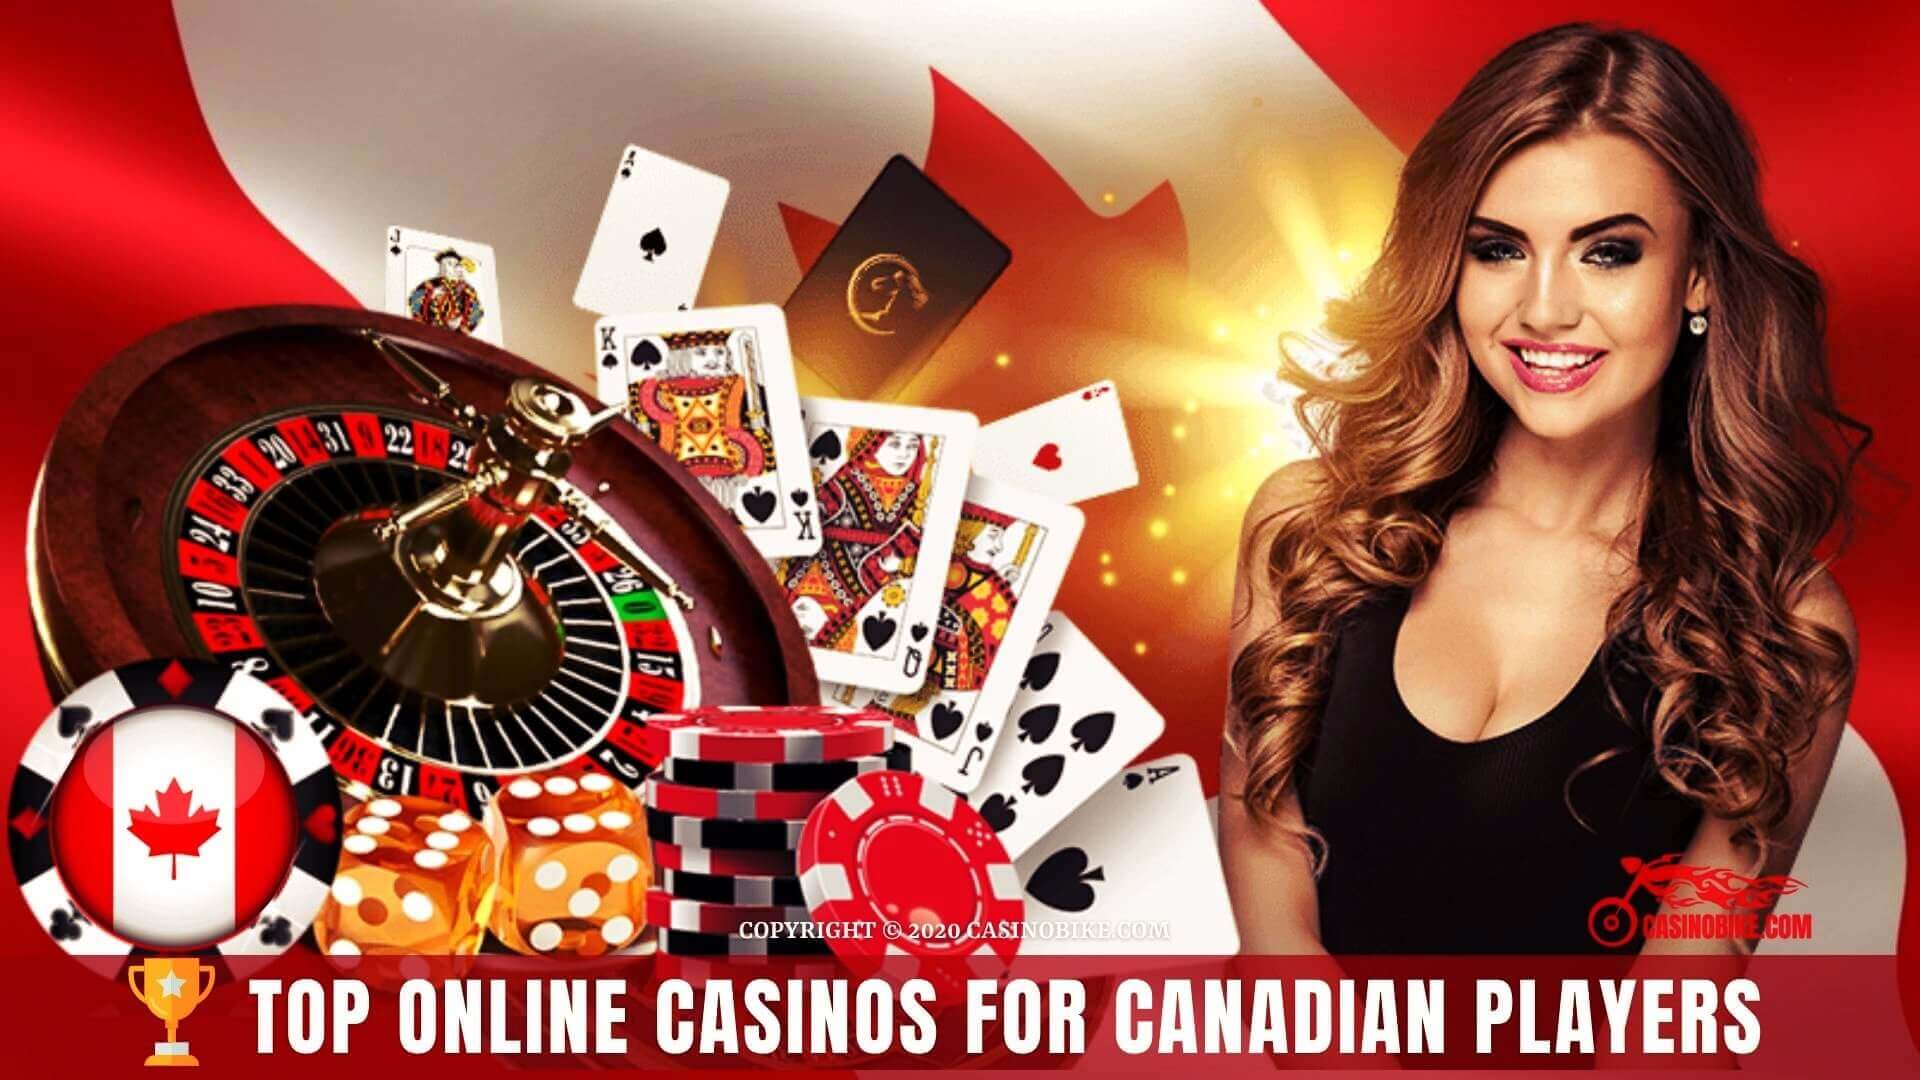 Top Online Casinos for Canadian Players